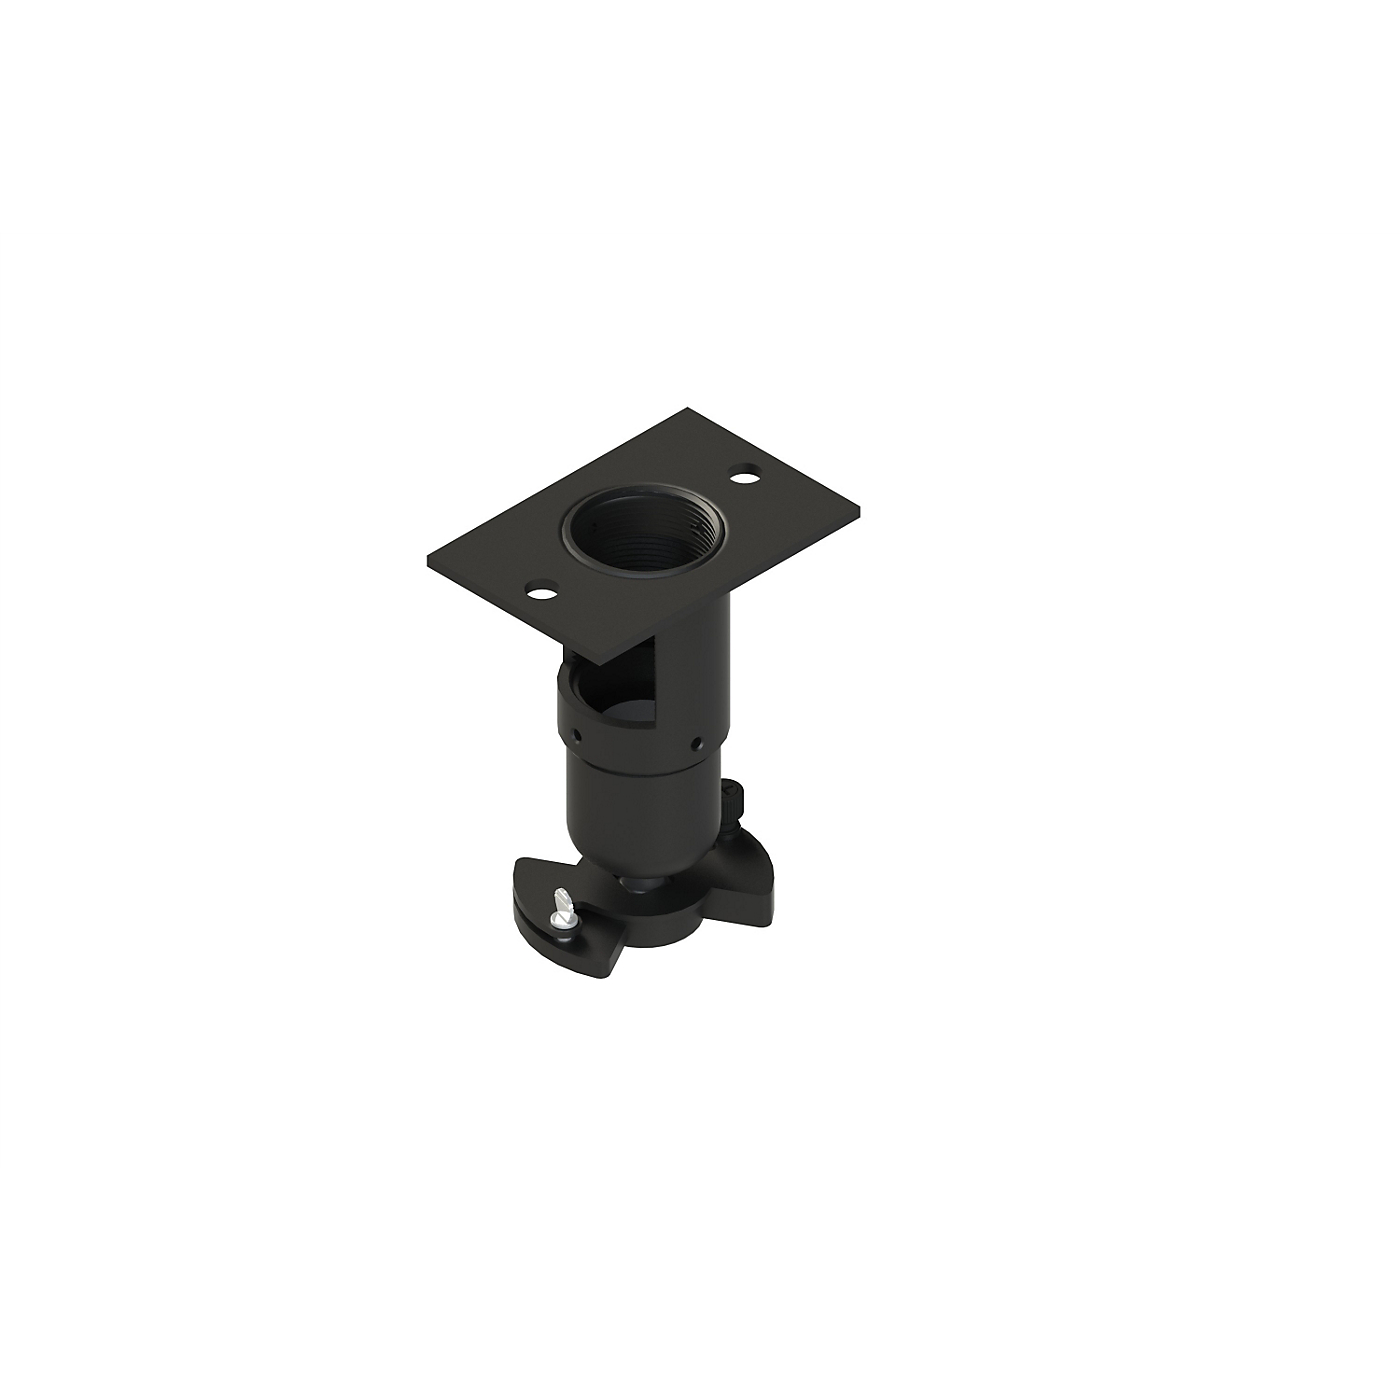 PJF2-1-S PJF2 Projector Mount (PAP model adapter plate required)